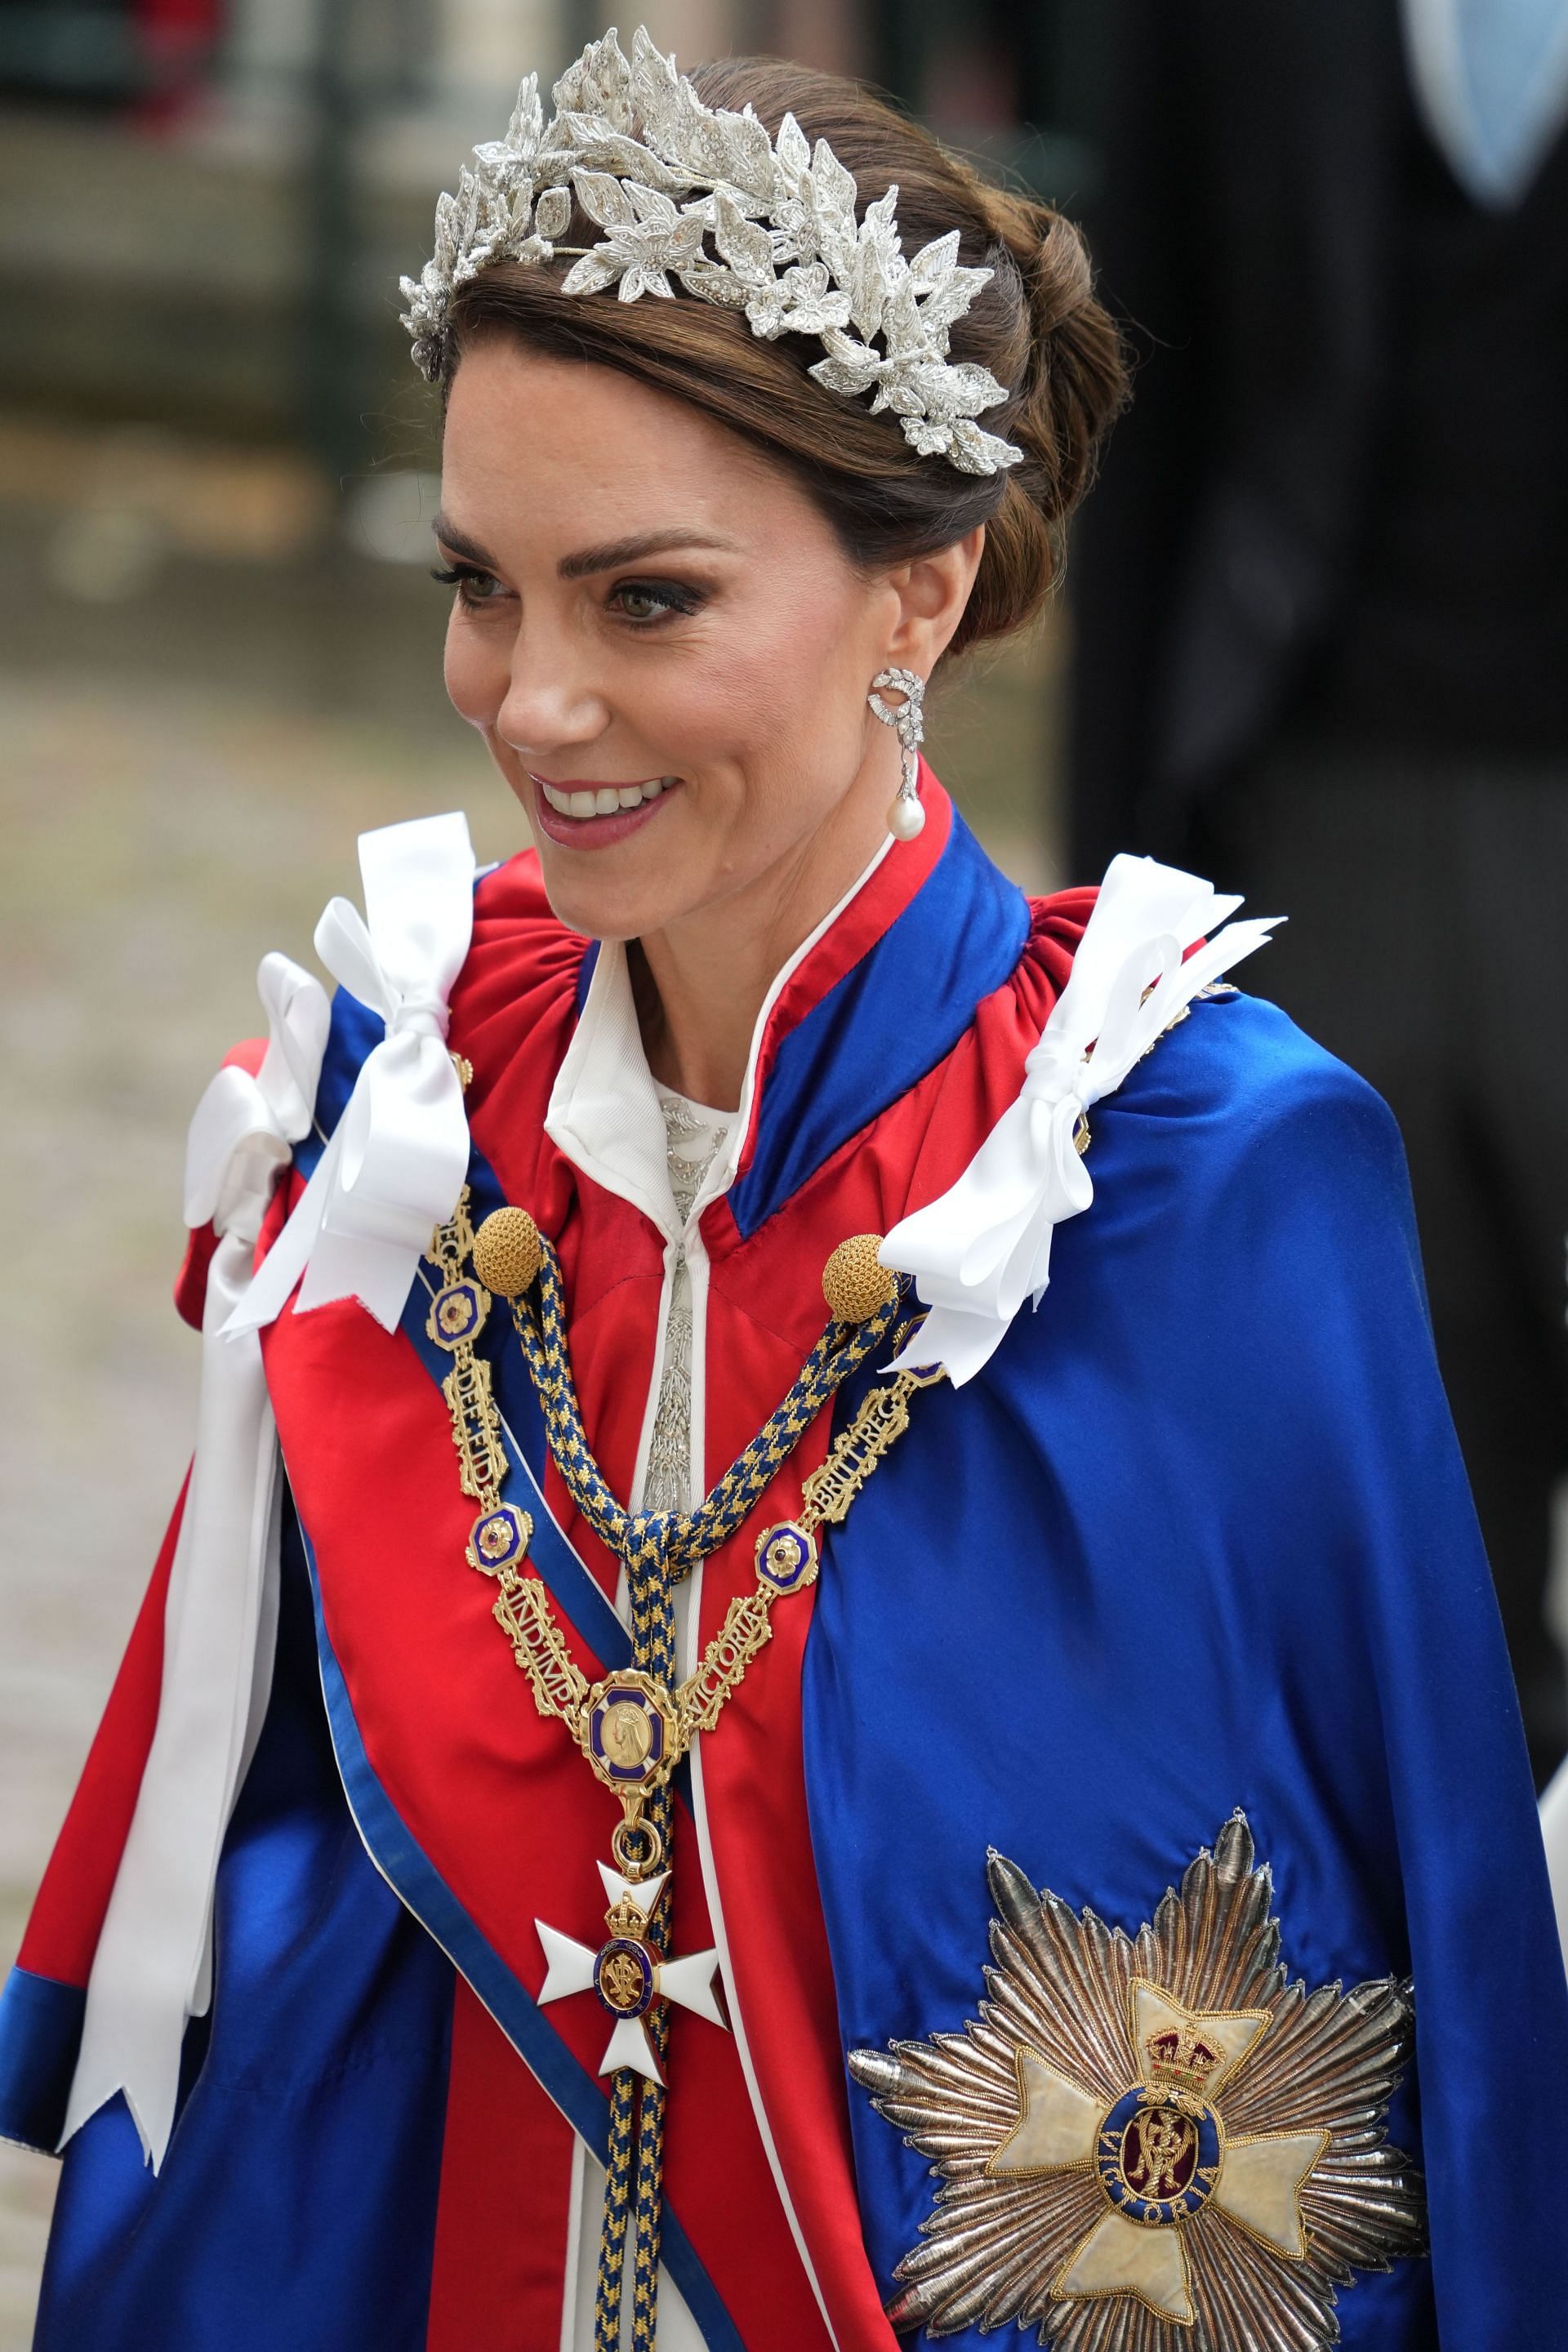 Kate Middleton on the Coronation Day of Their Majesties King Charles III And Queen Camilla (Source: Getty)